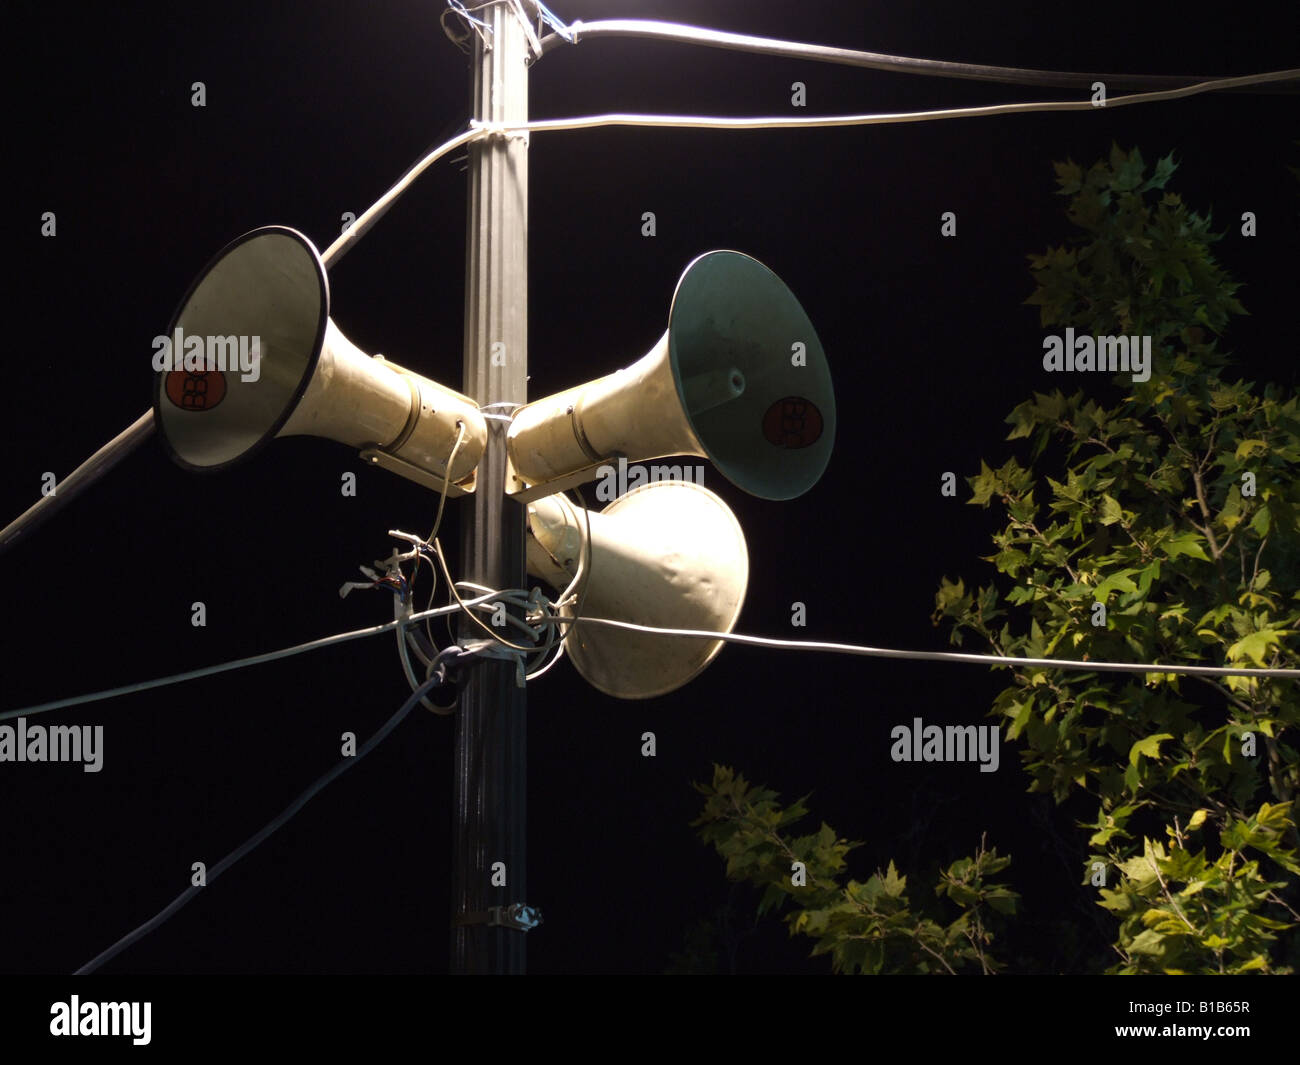 tannoy loudspeaker system outdoors at night Stock Photo